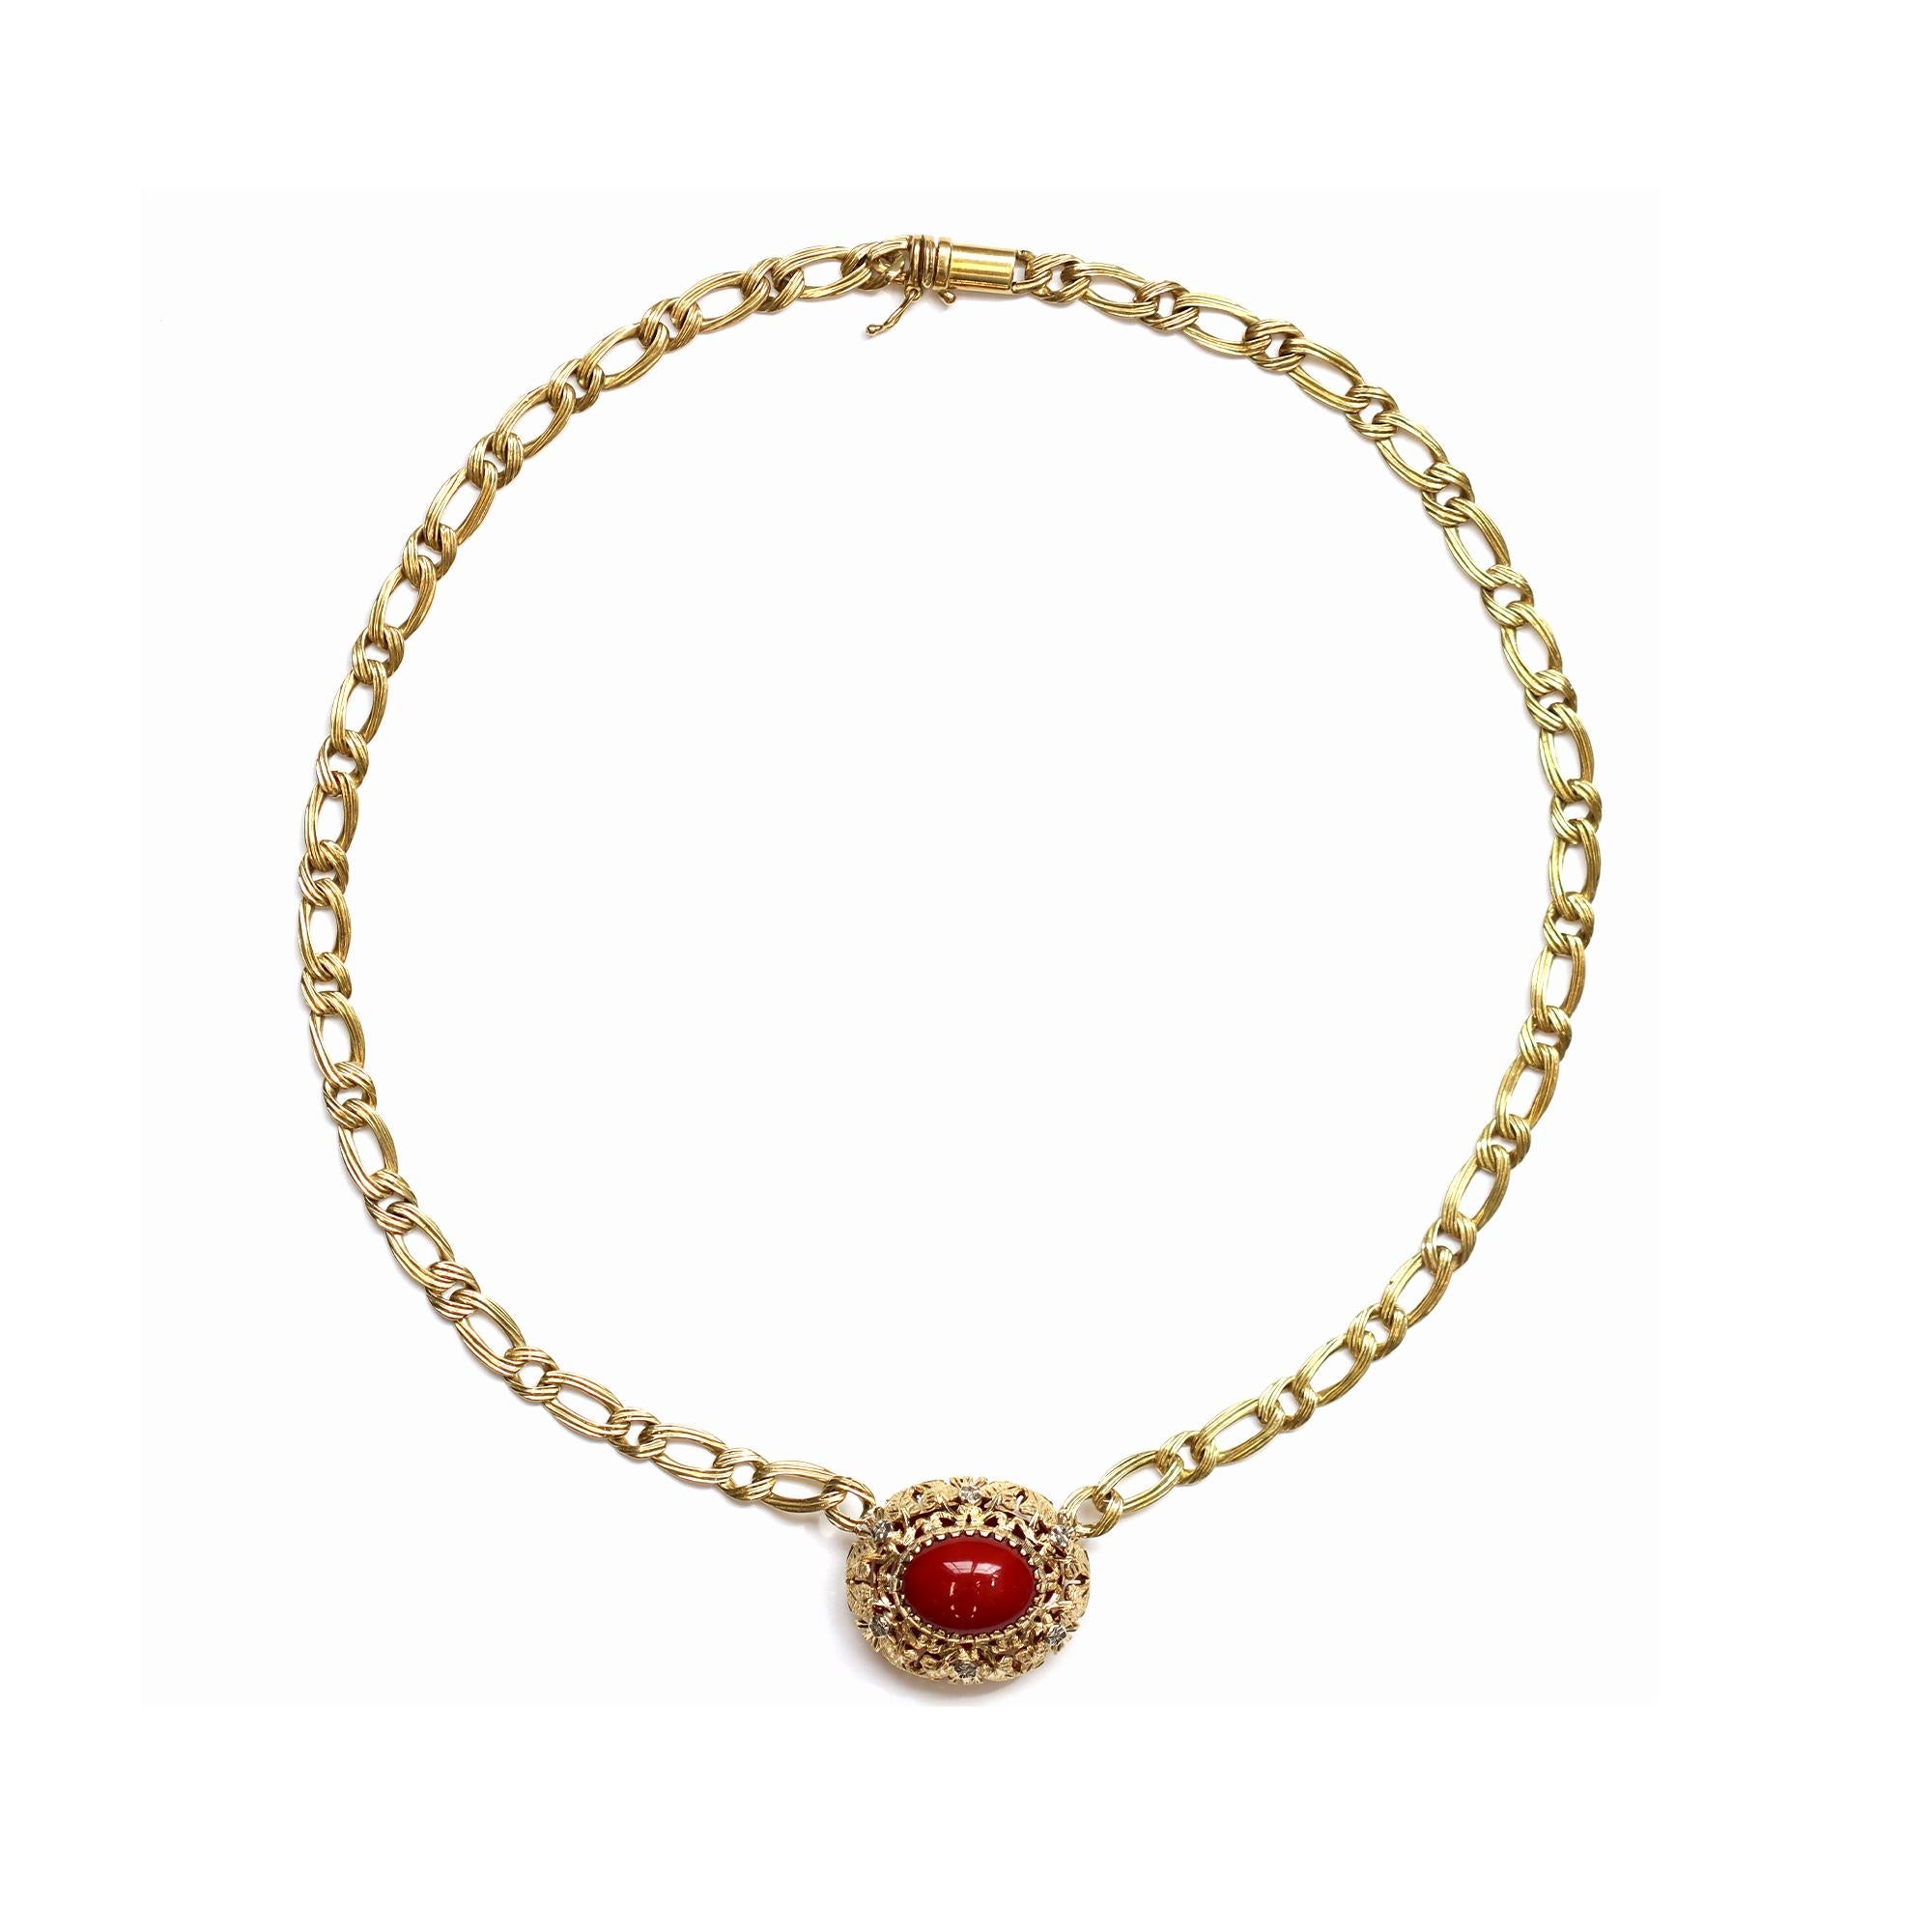 A necklace circa 1960 featuring an Oxblood coral Cabochon with an intricate handmade bezel. The Coral is natural with no indications of enhancement or dye and displays a very dark brownish-red hue. The necklace is set in 18-karat yellow gold. The